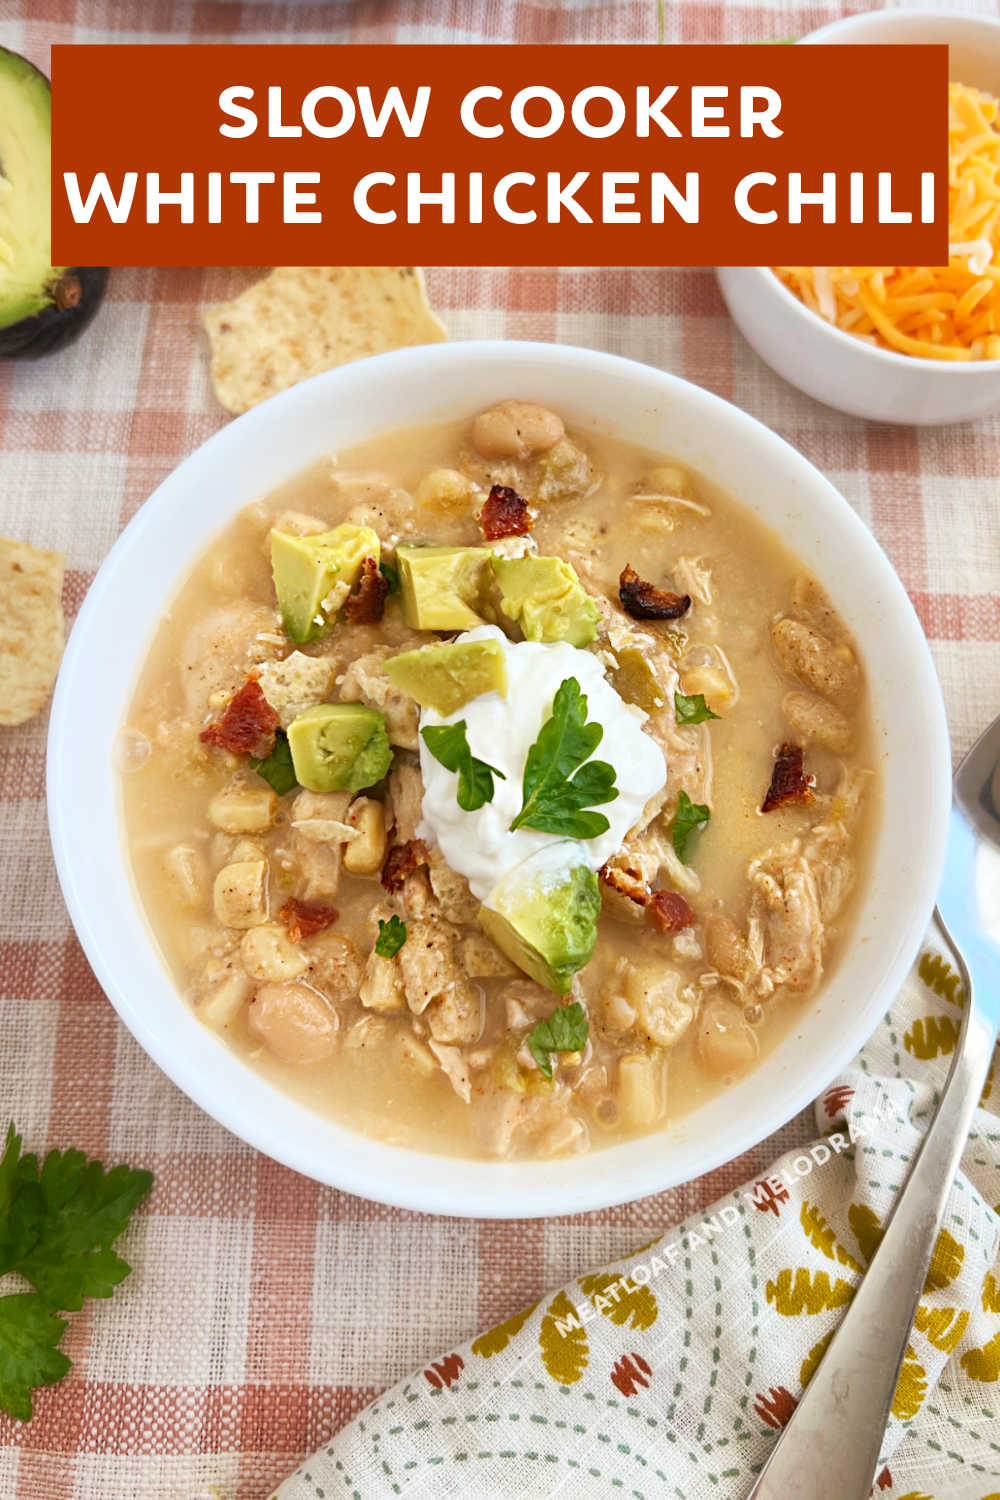 This creamy slow cooker white chicken chili recipe with white beans, corn and green chiles is an easy crockpot meal perfect for busy weeknights. One of the easiest slow cooker recipes you can make and absolutely delicious on a cold day! via @meamel